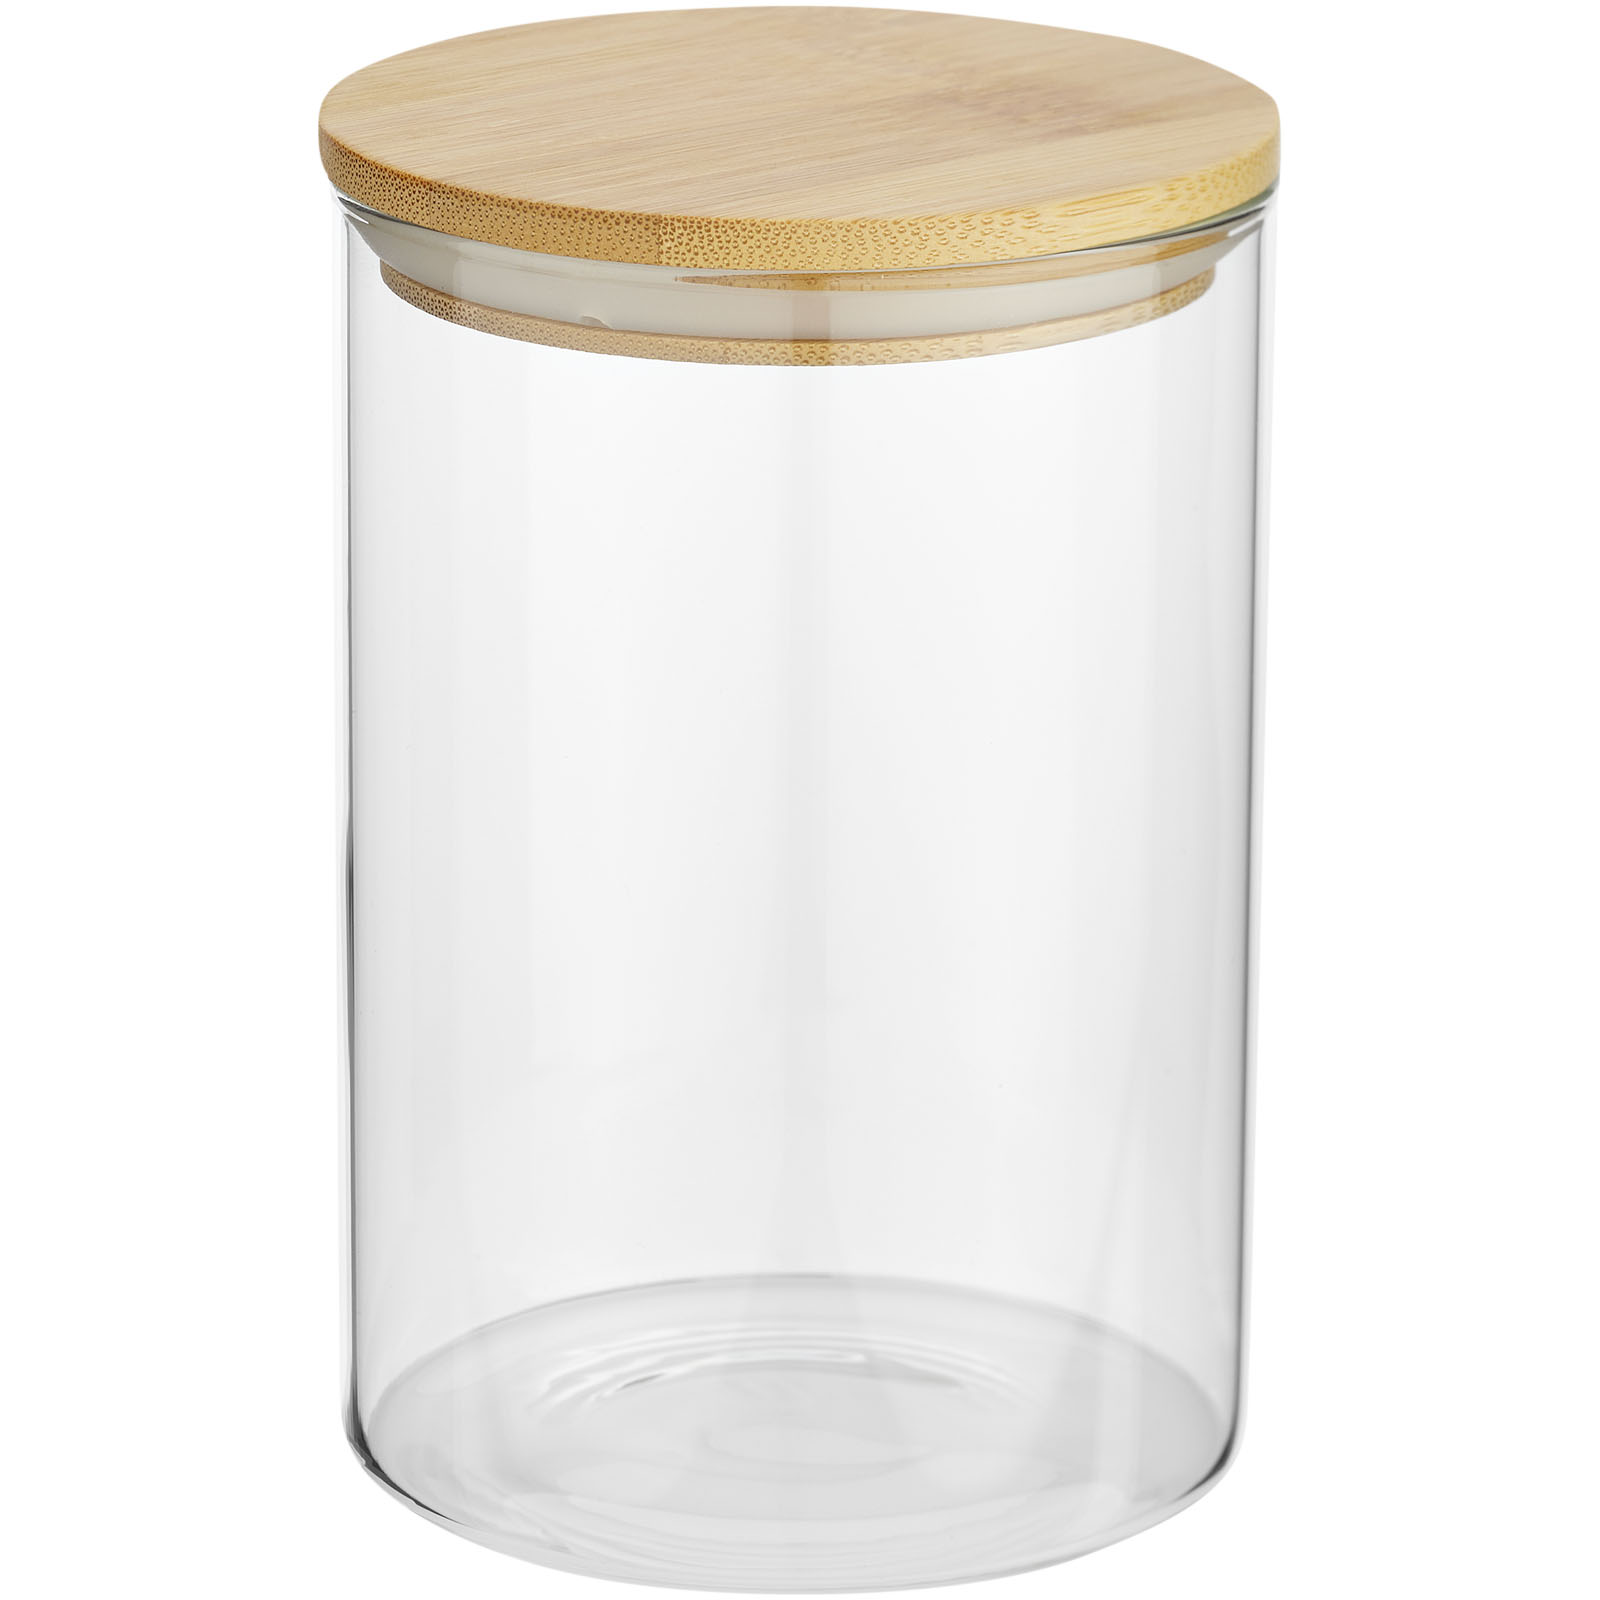 Advertising Kitchenware - Boley 550 ml glass food container - 0